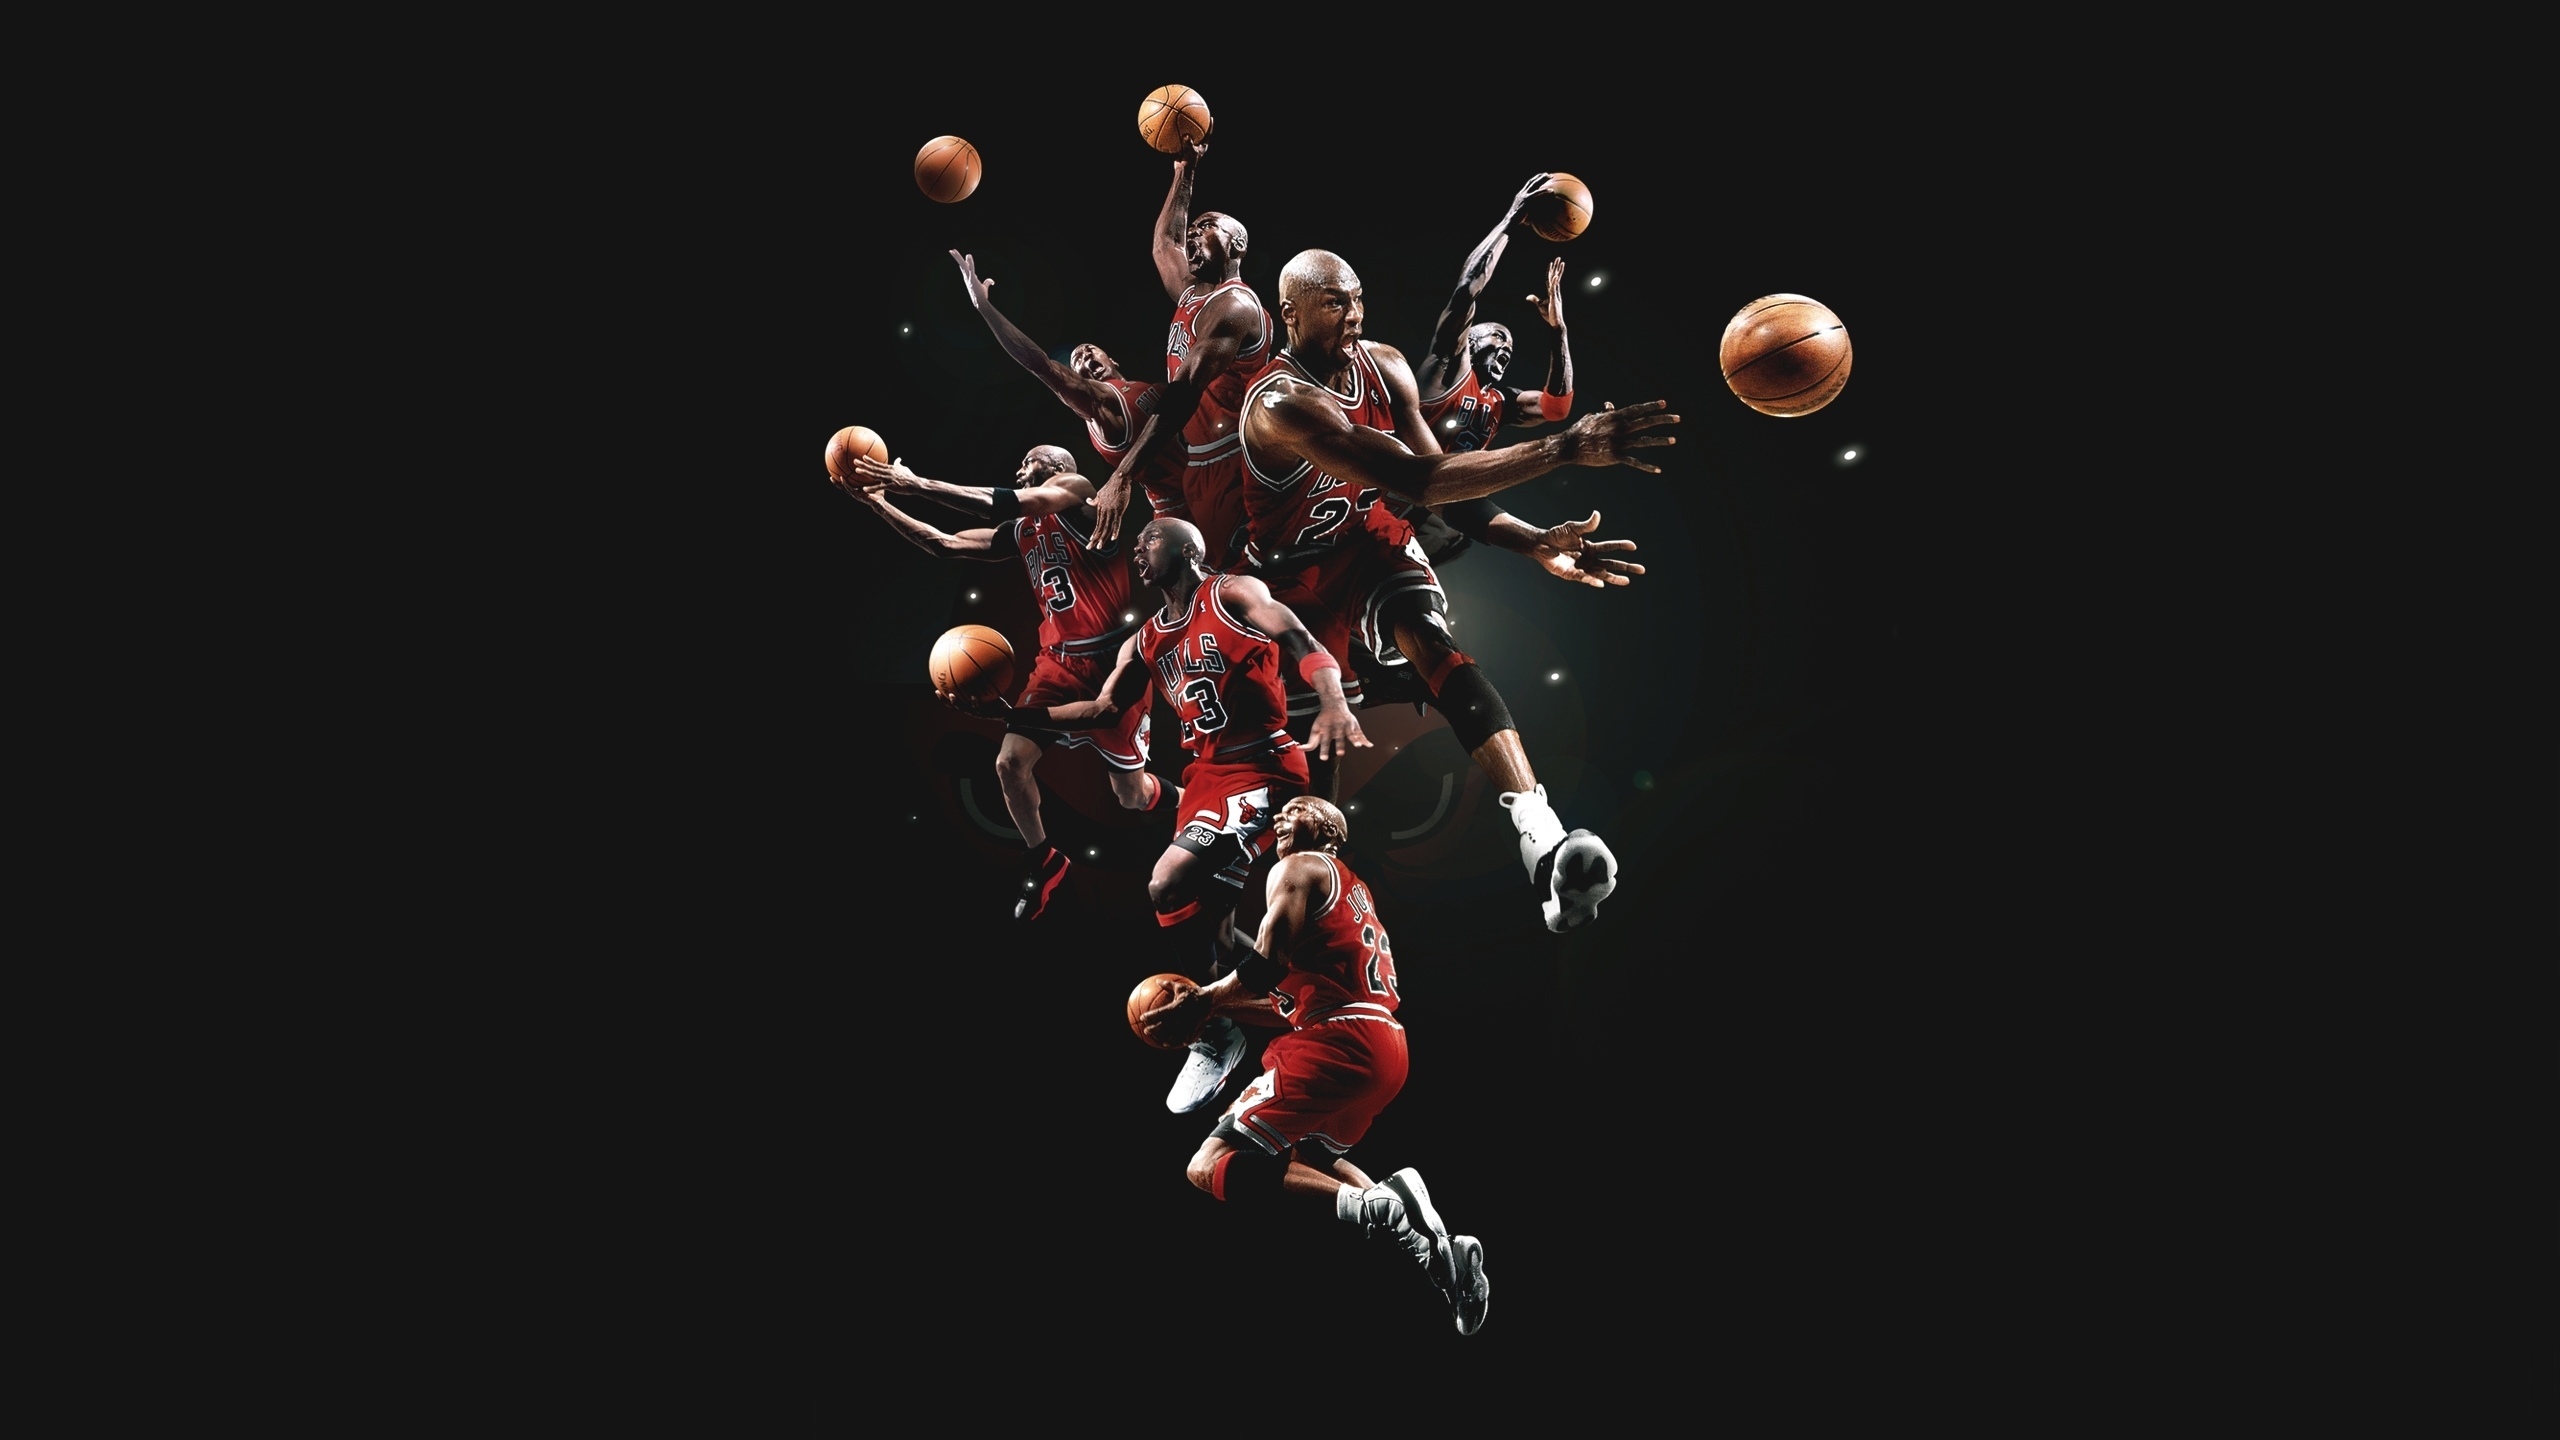 moving basketball wallpapers